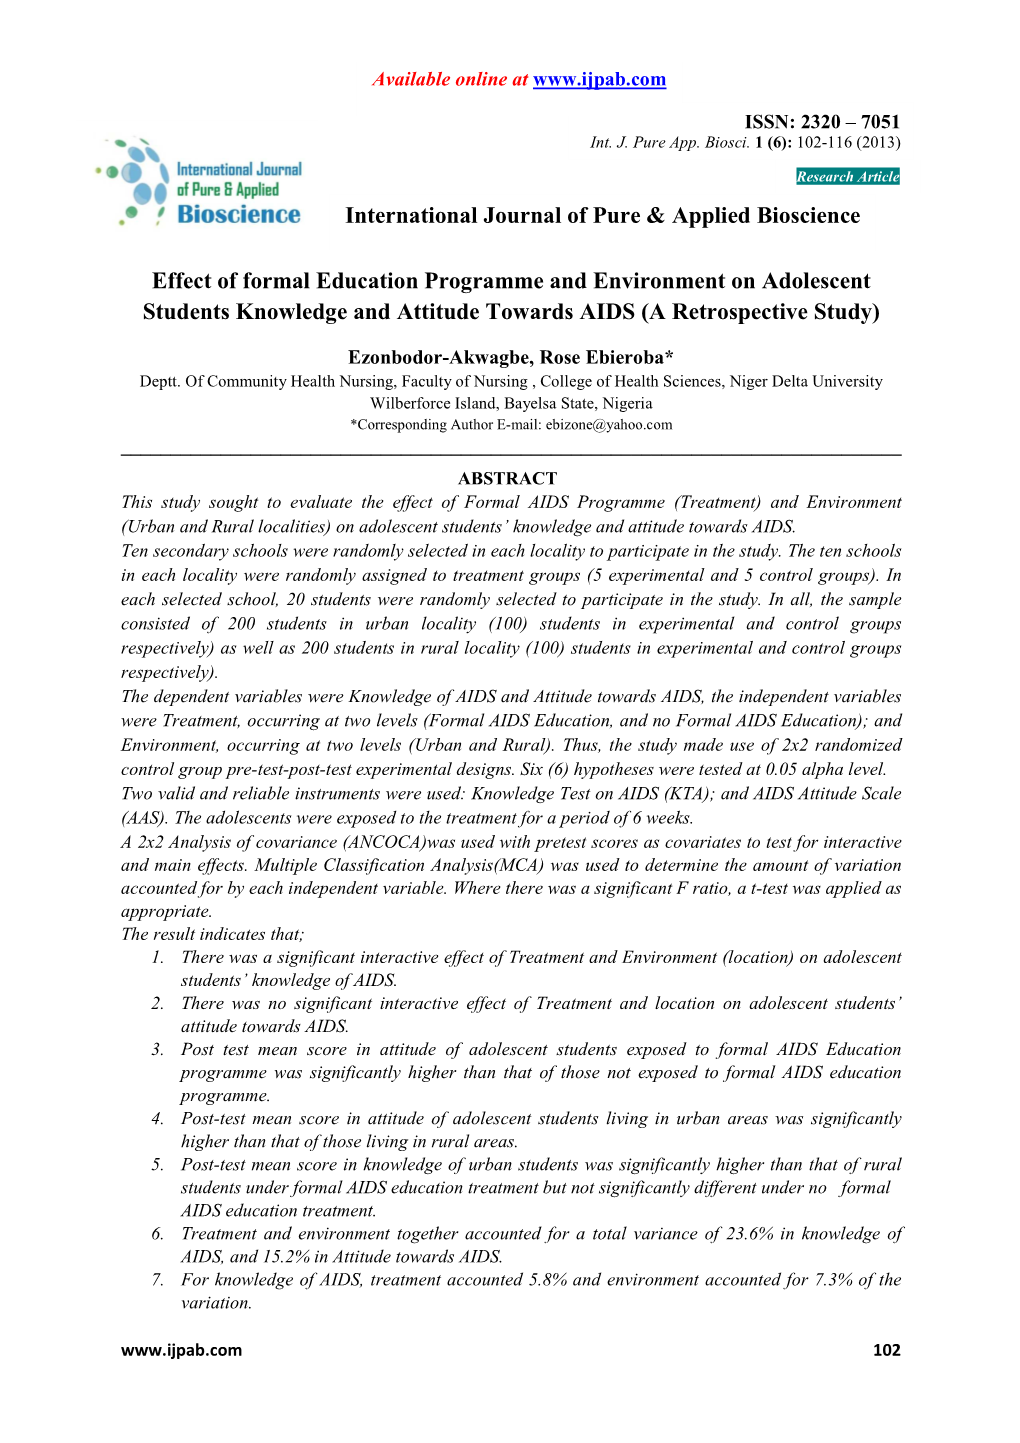 Effect of Formal Education Programme and Environment on Adolescent Students Knowledge and Attitude Towards AIDS (A Retrospective Study)